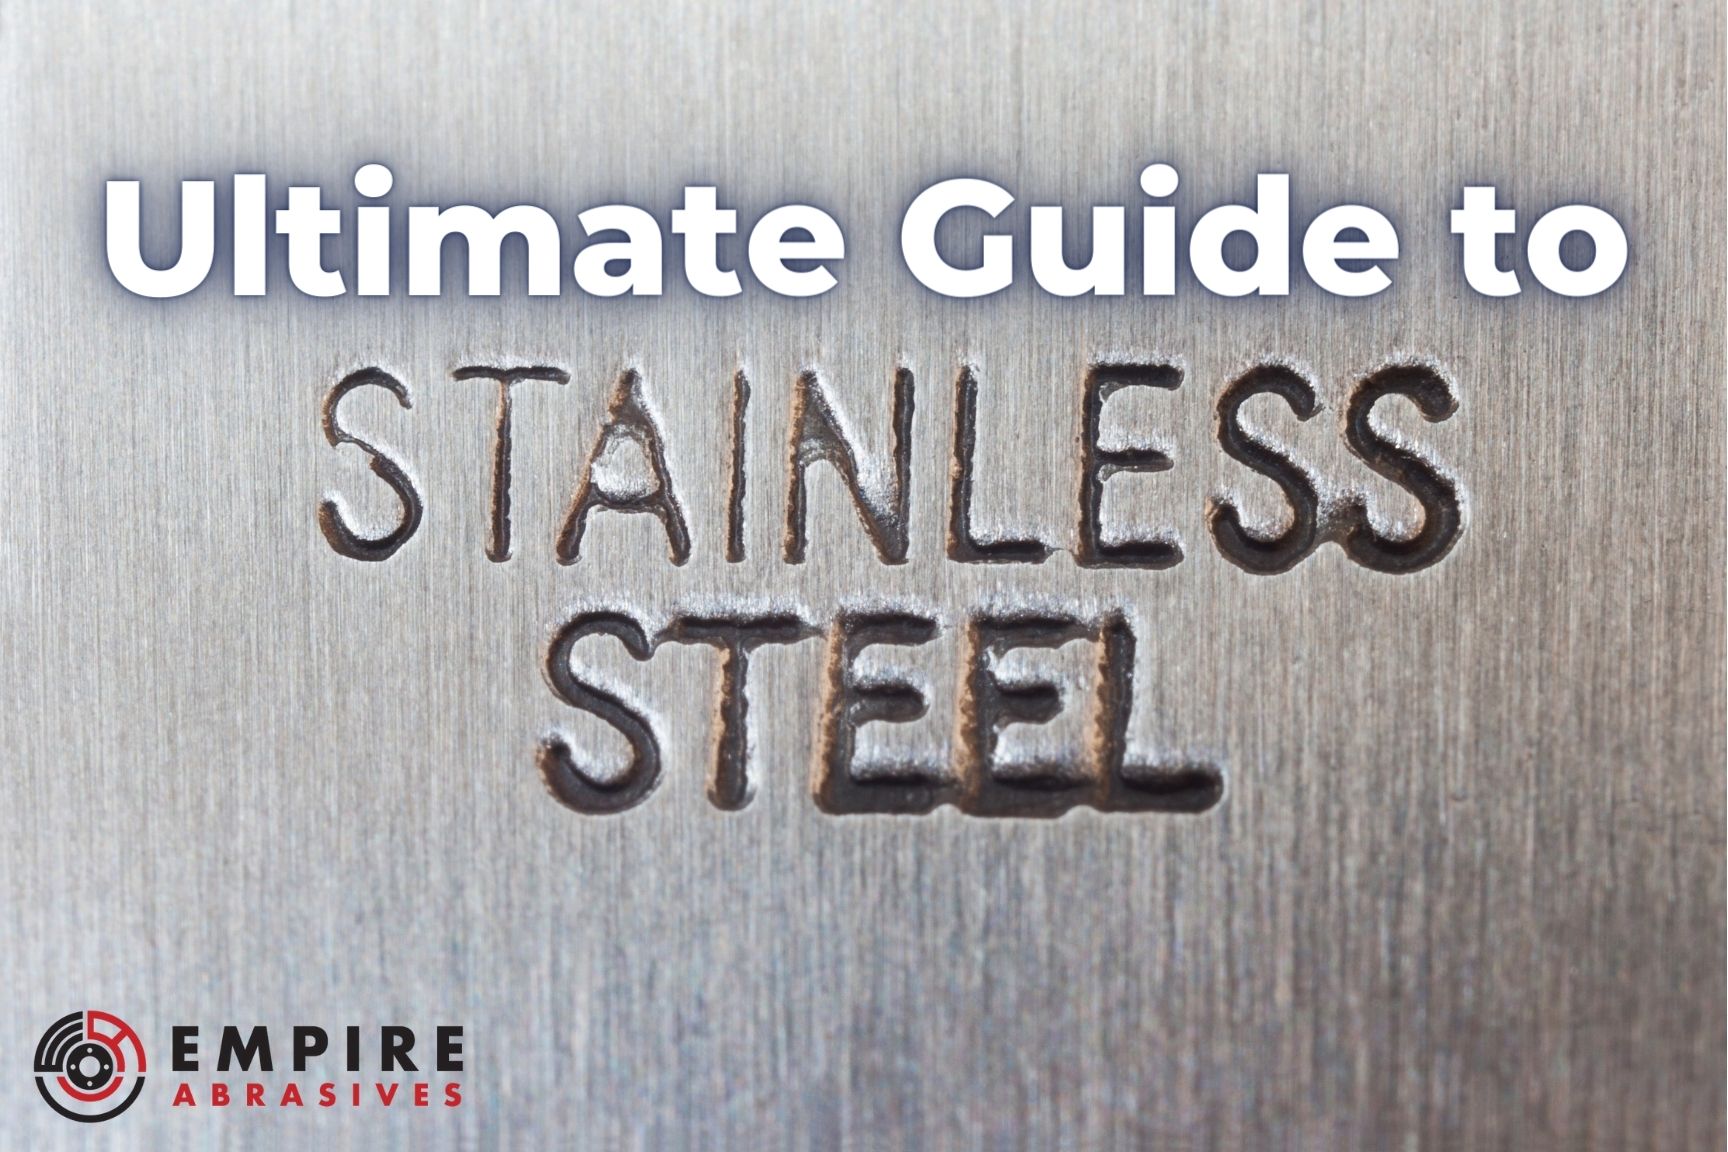 Ultimate Guide - Stainless Steel Fabrication, Grinding, and Finishing with Abrasives